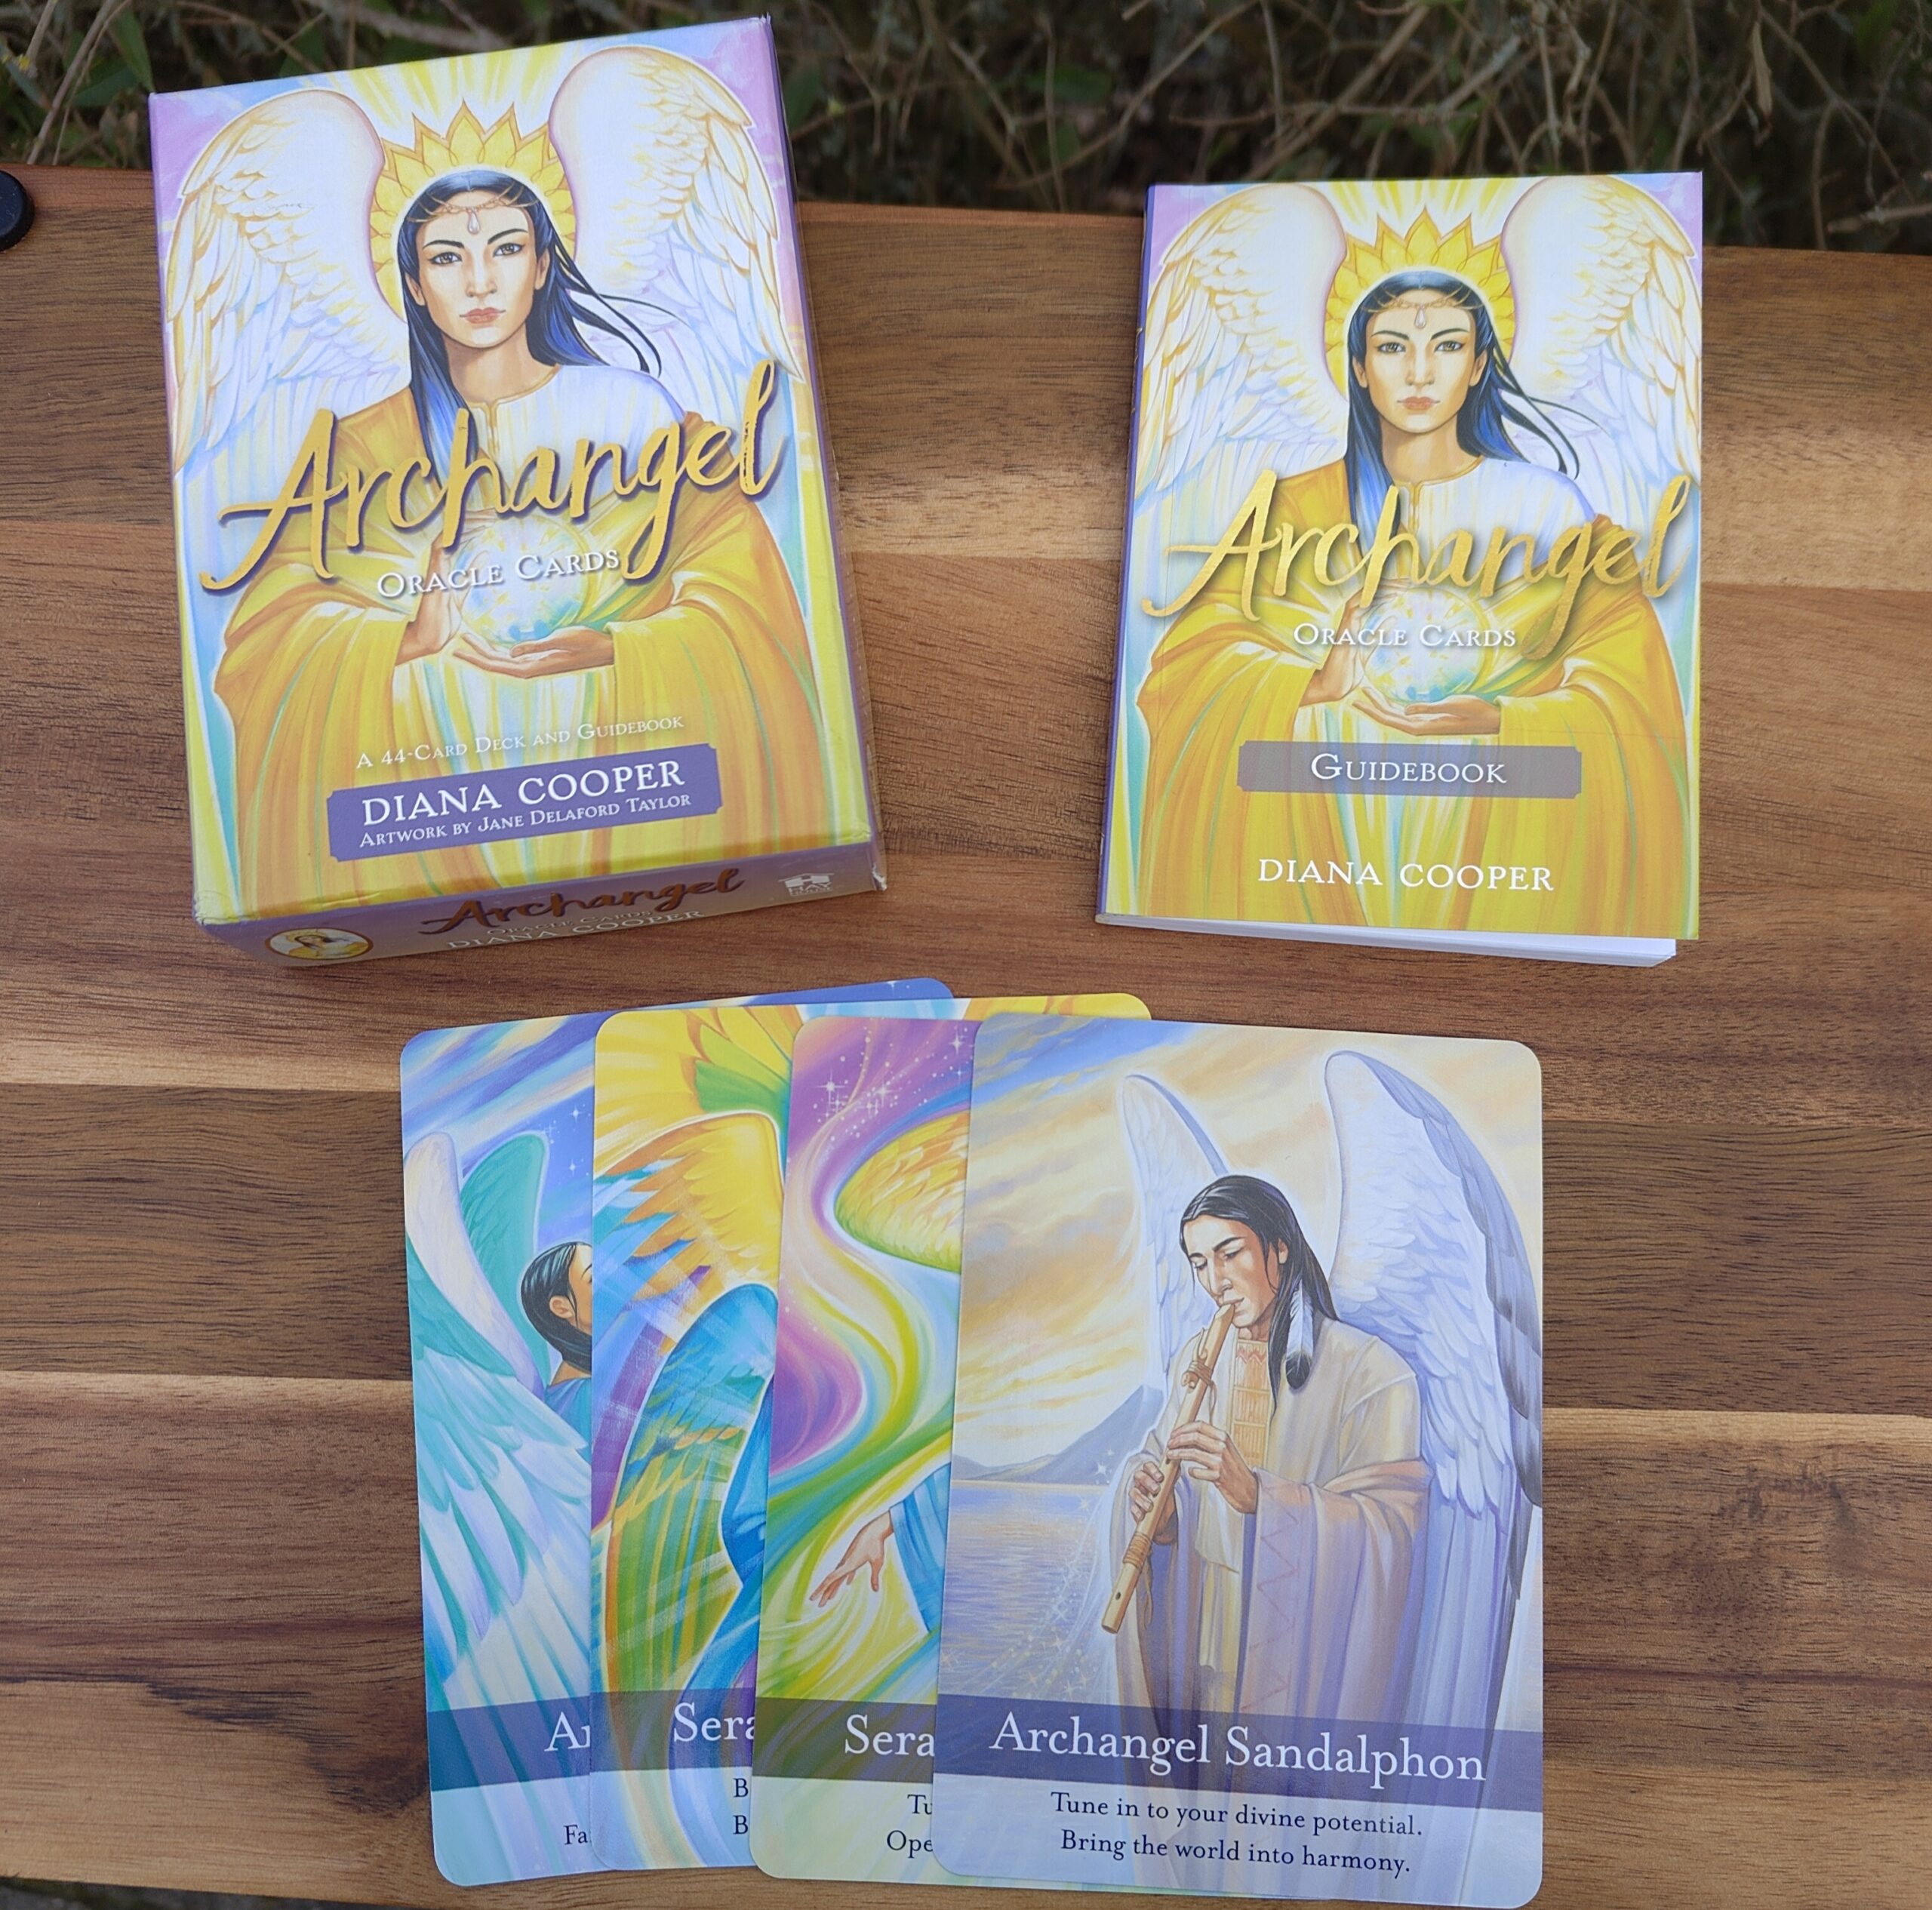 Archangel - Oracle Cards